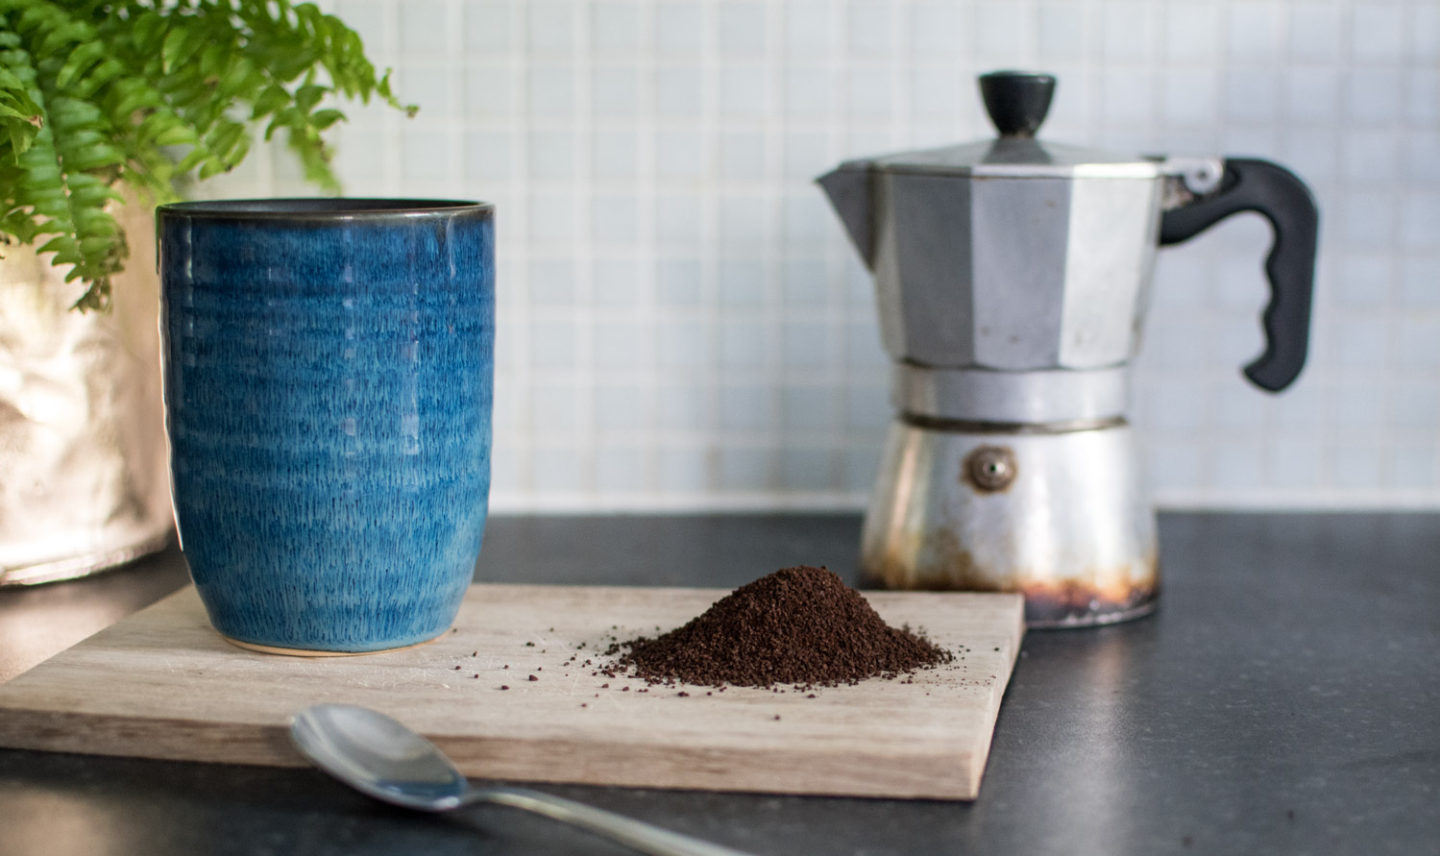 Opt for ground coffee over capsules to help make your kitchen plastic free